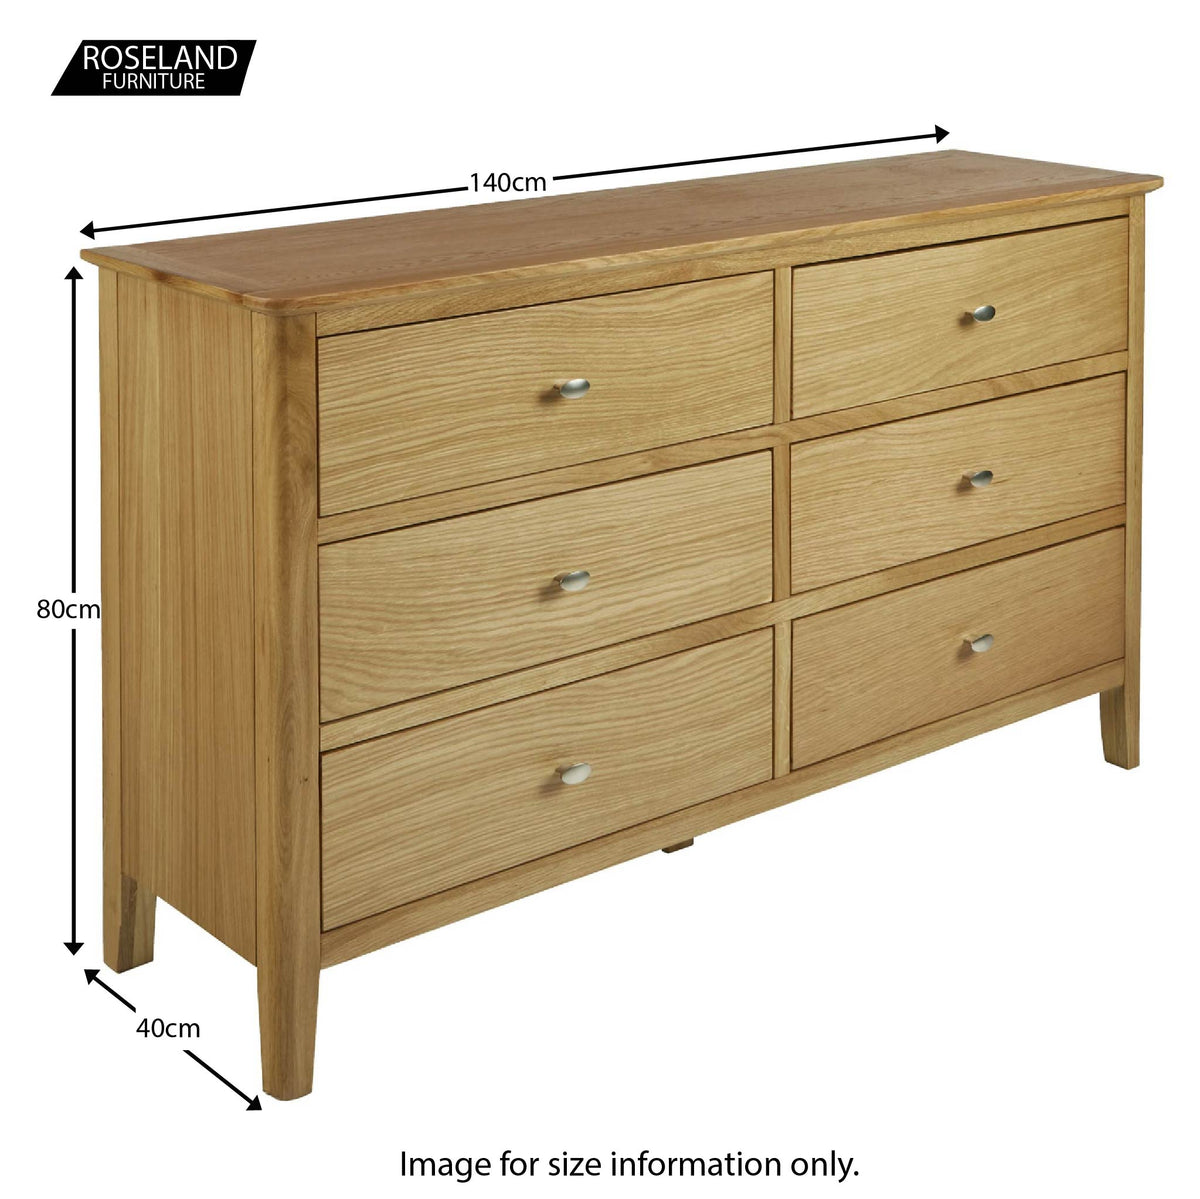 Alba Oak 6 Drawer Chest of Drawer Unit - Size guide